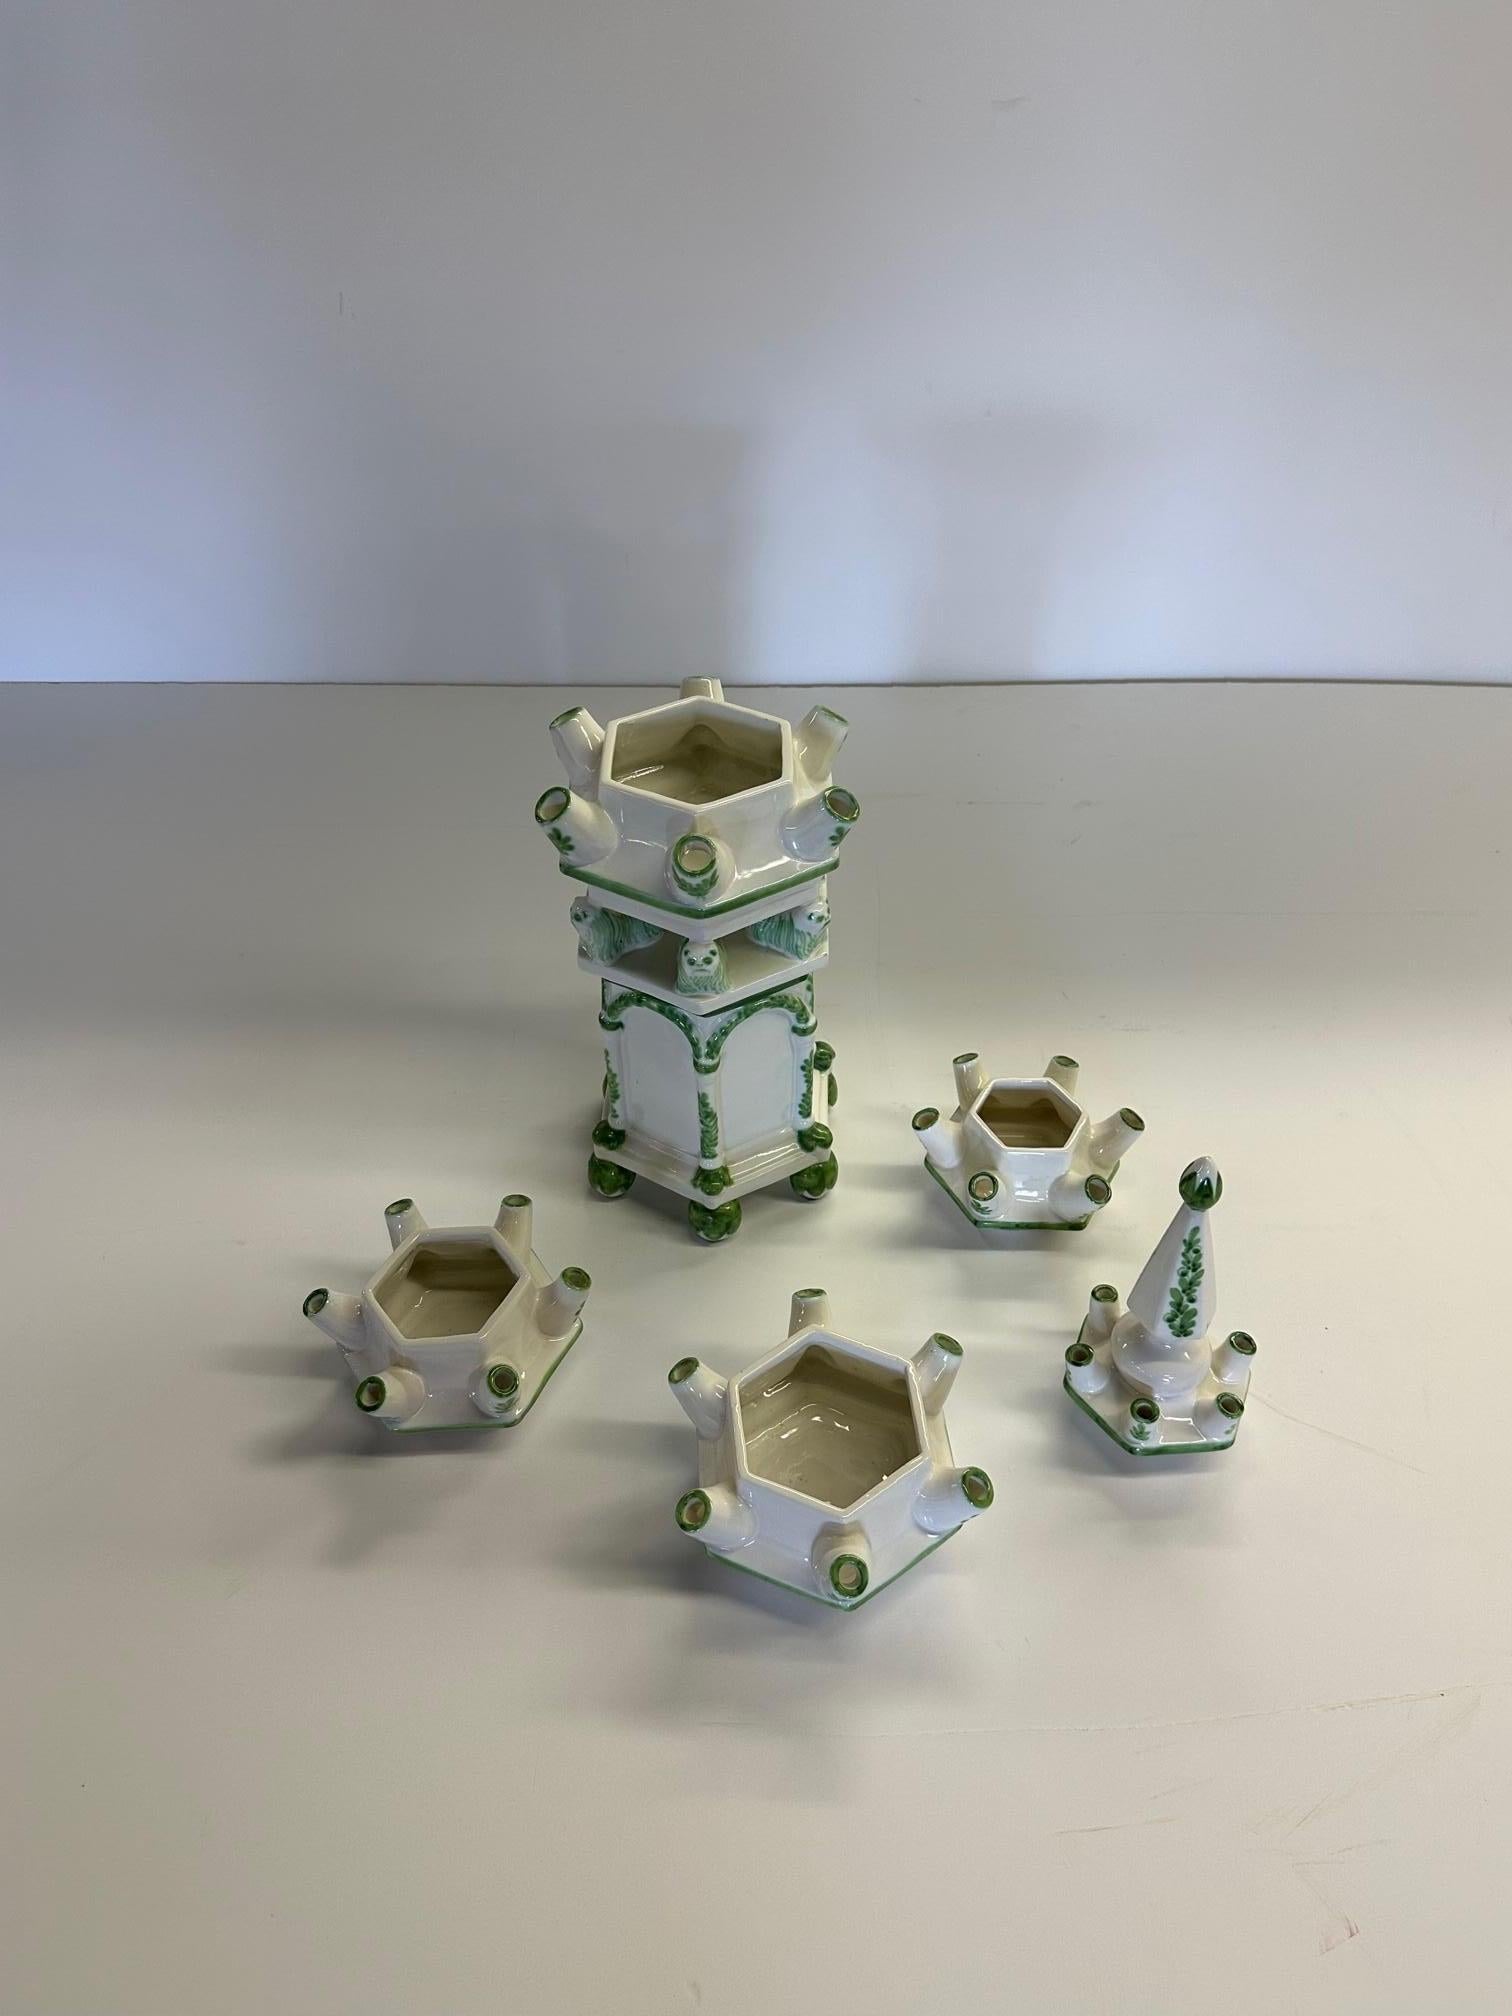 Whimsical Italian ceramic painted bough pot or flower vase that comes apart in 4 pieces and has multiple ports for flowers. A lovely cream and light green decorative accessory.